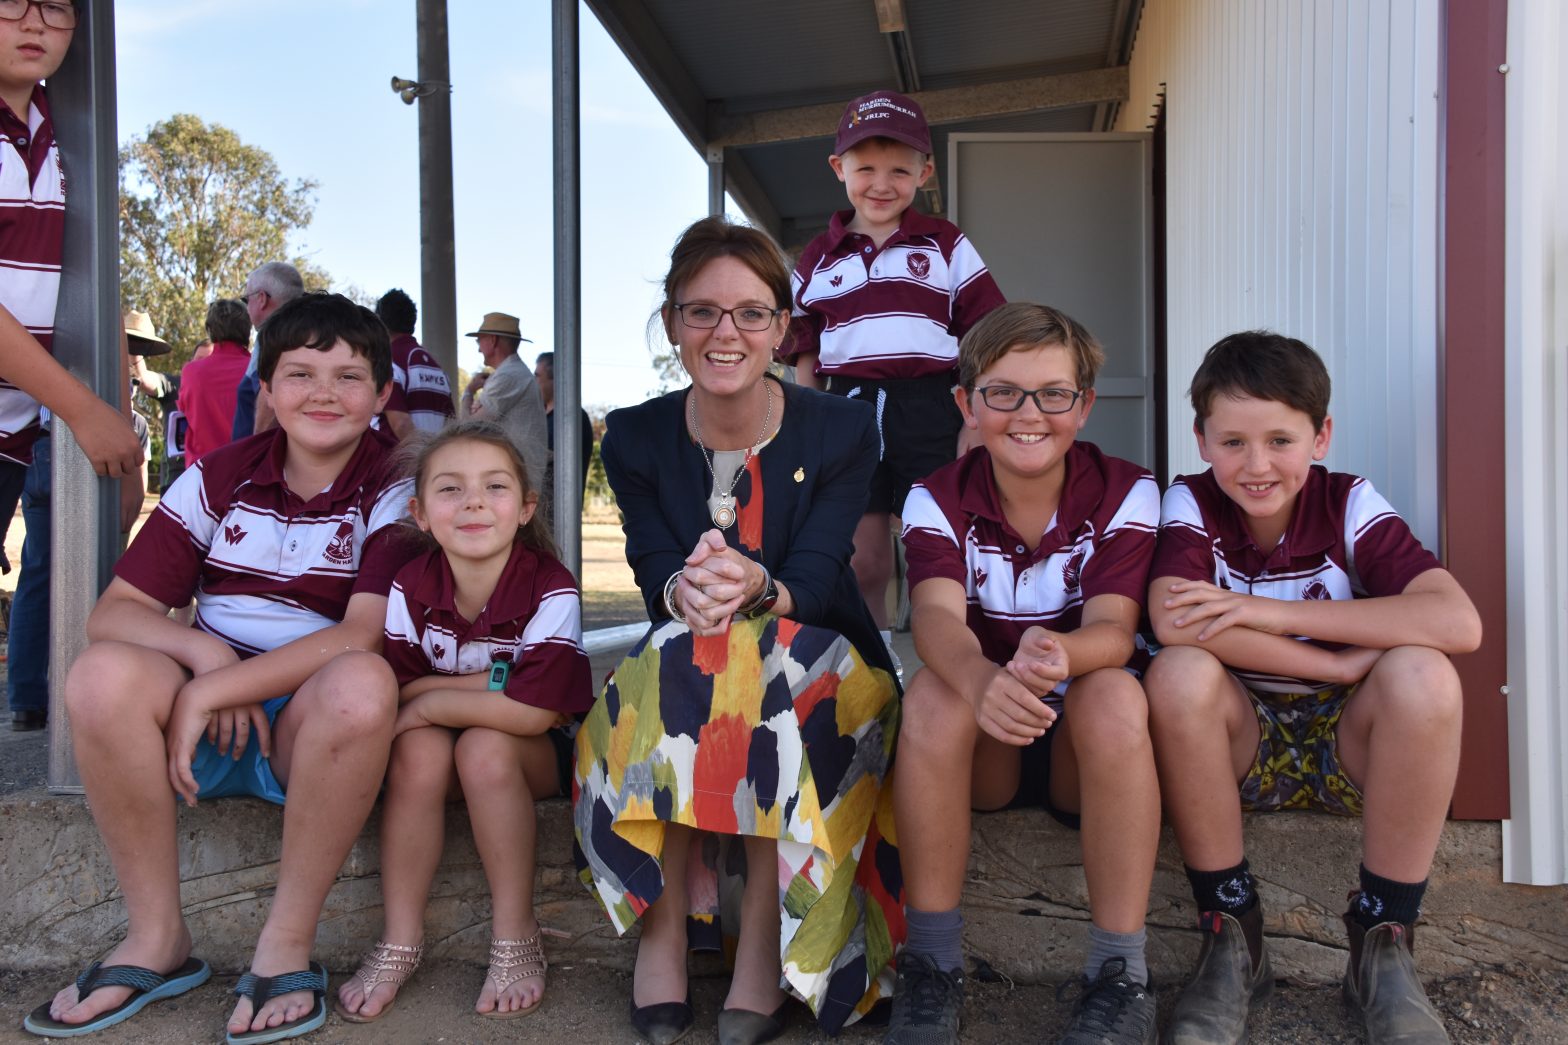 Member for Cootamundra Steph Cooke at McLean Oval to announce funding which will contribute to the construction of a new facility.